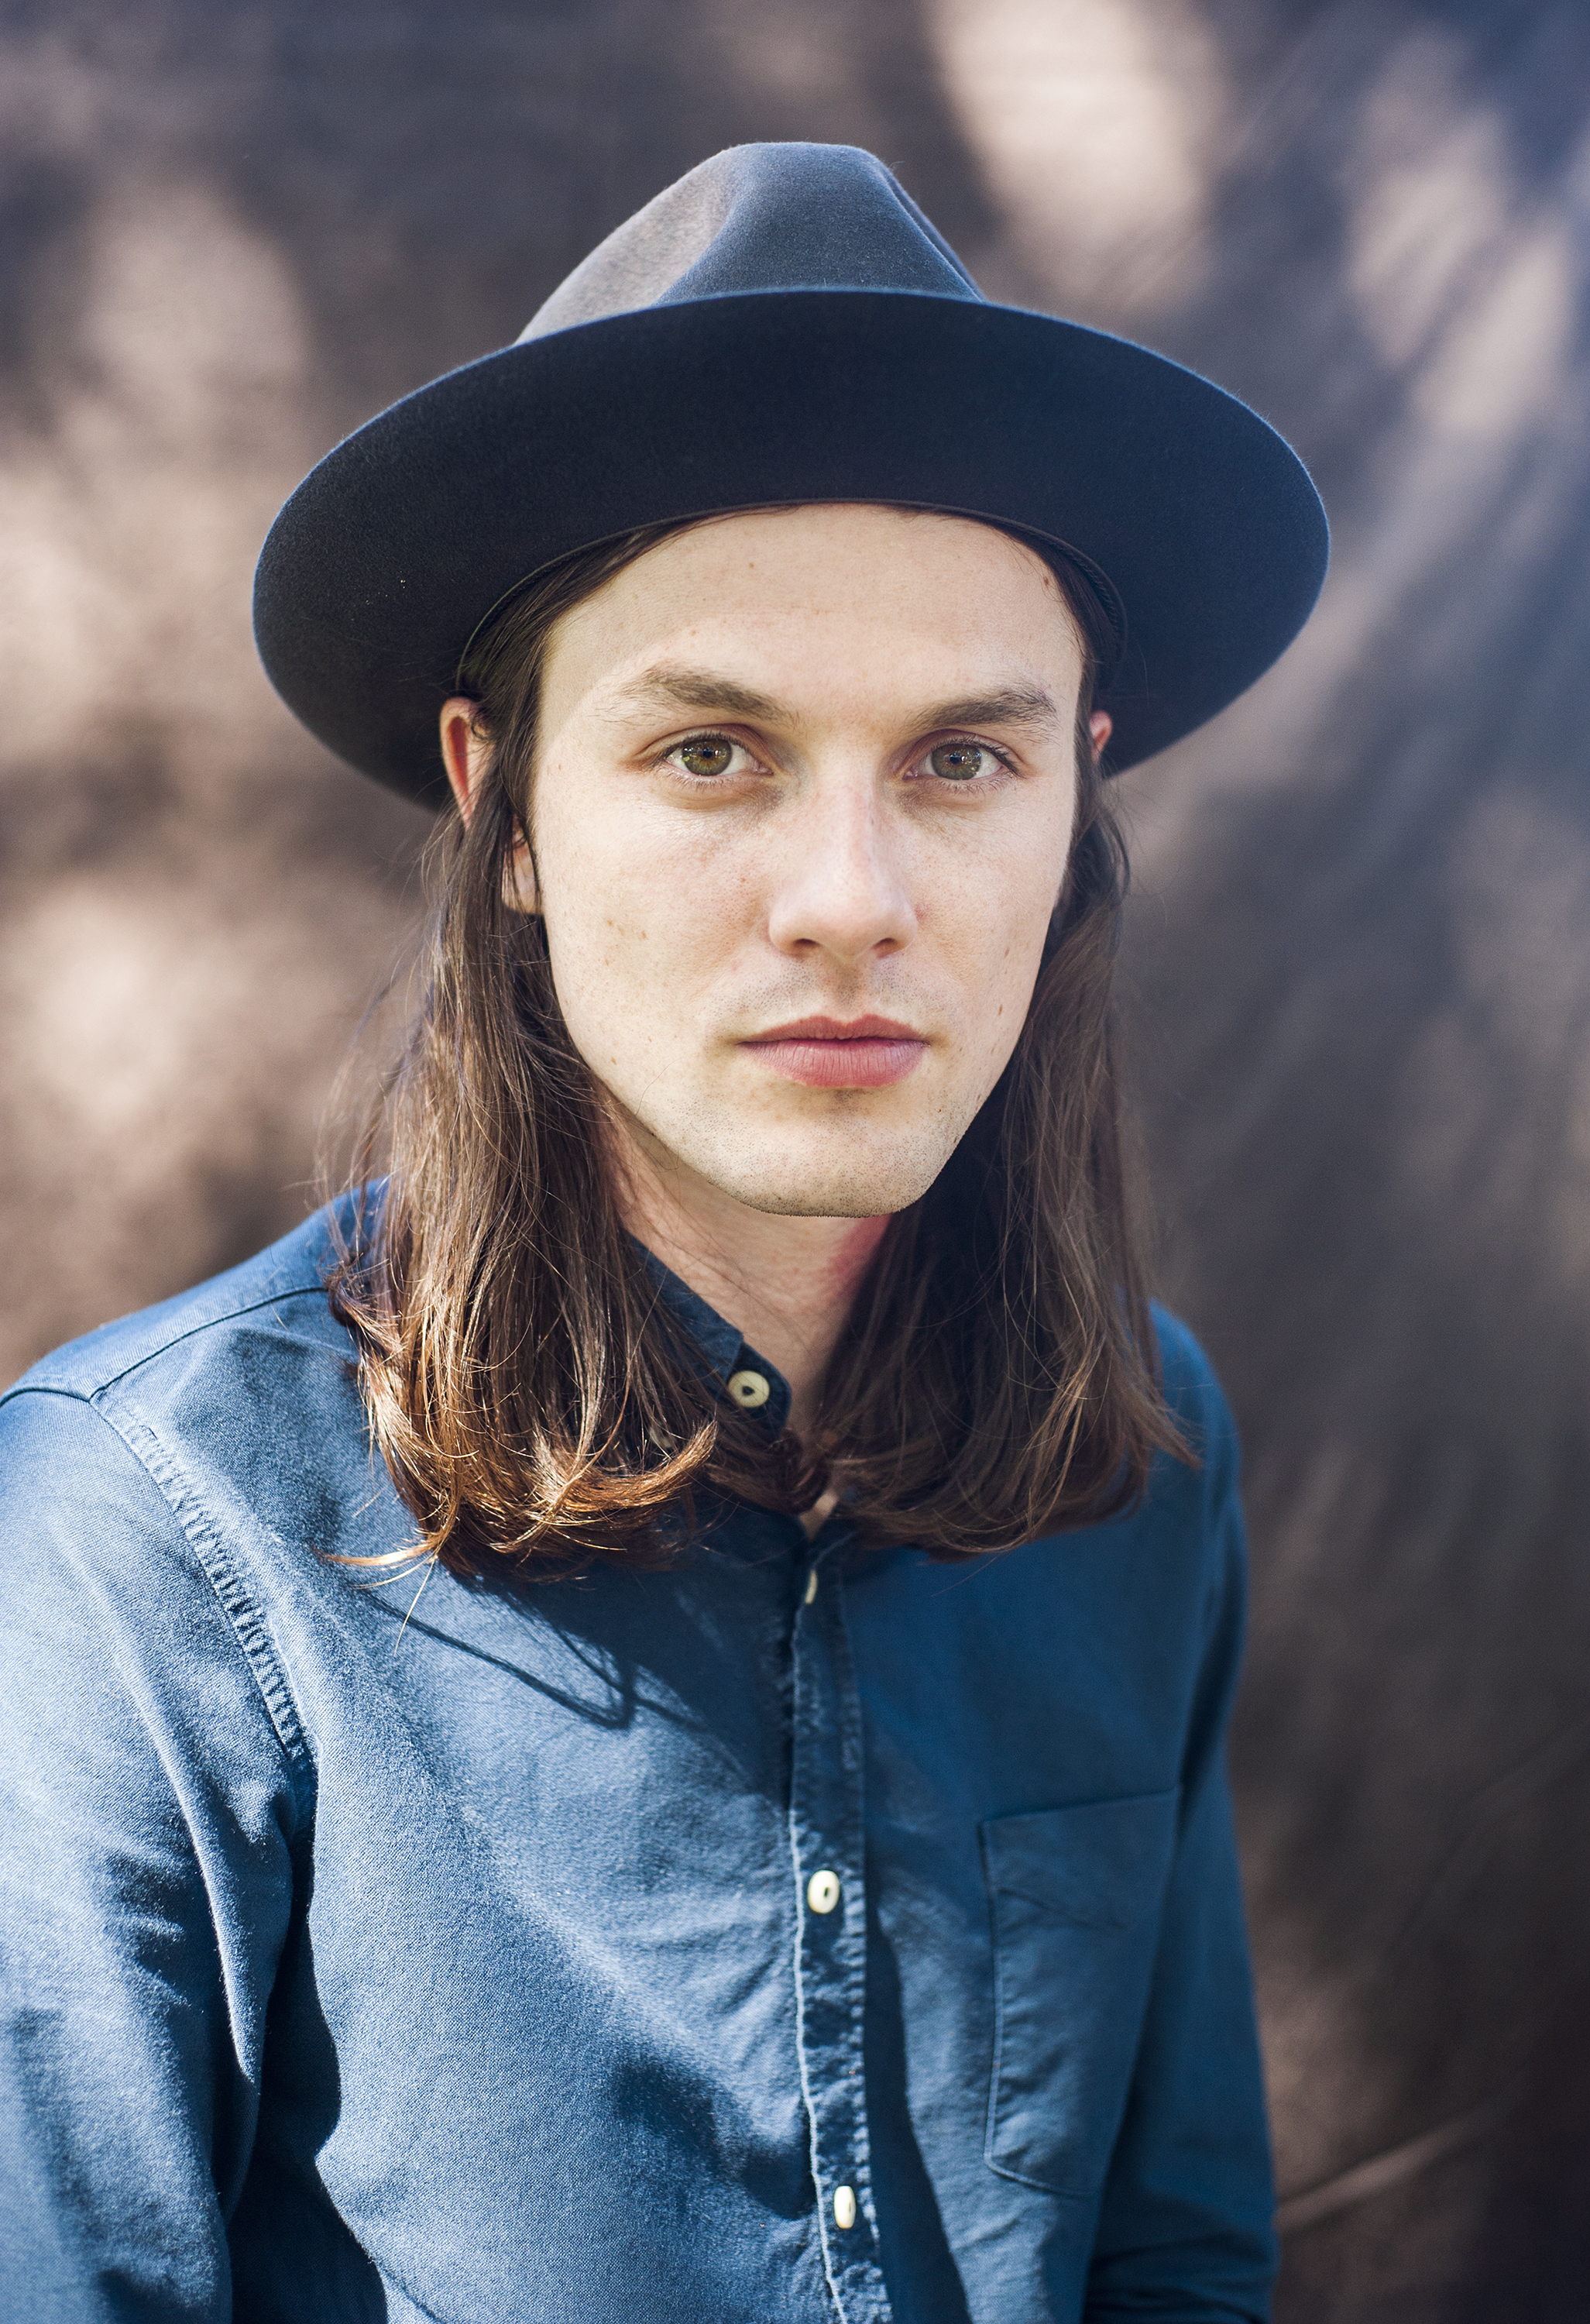 James Bay Acl Re Austin Music Source